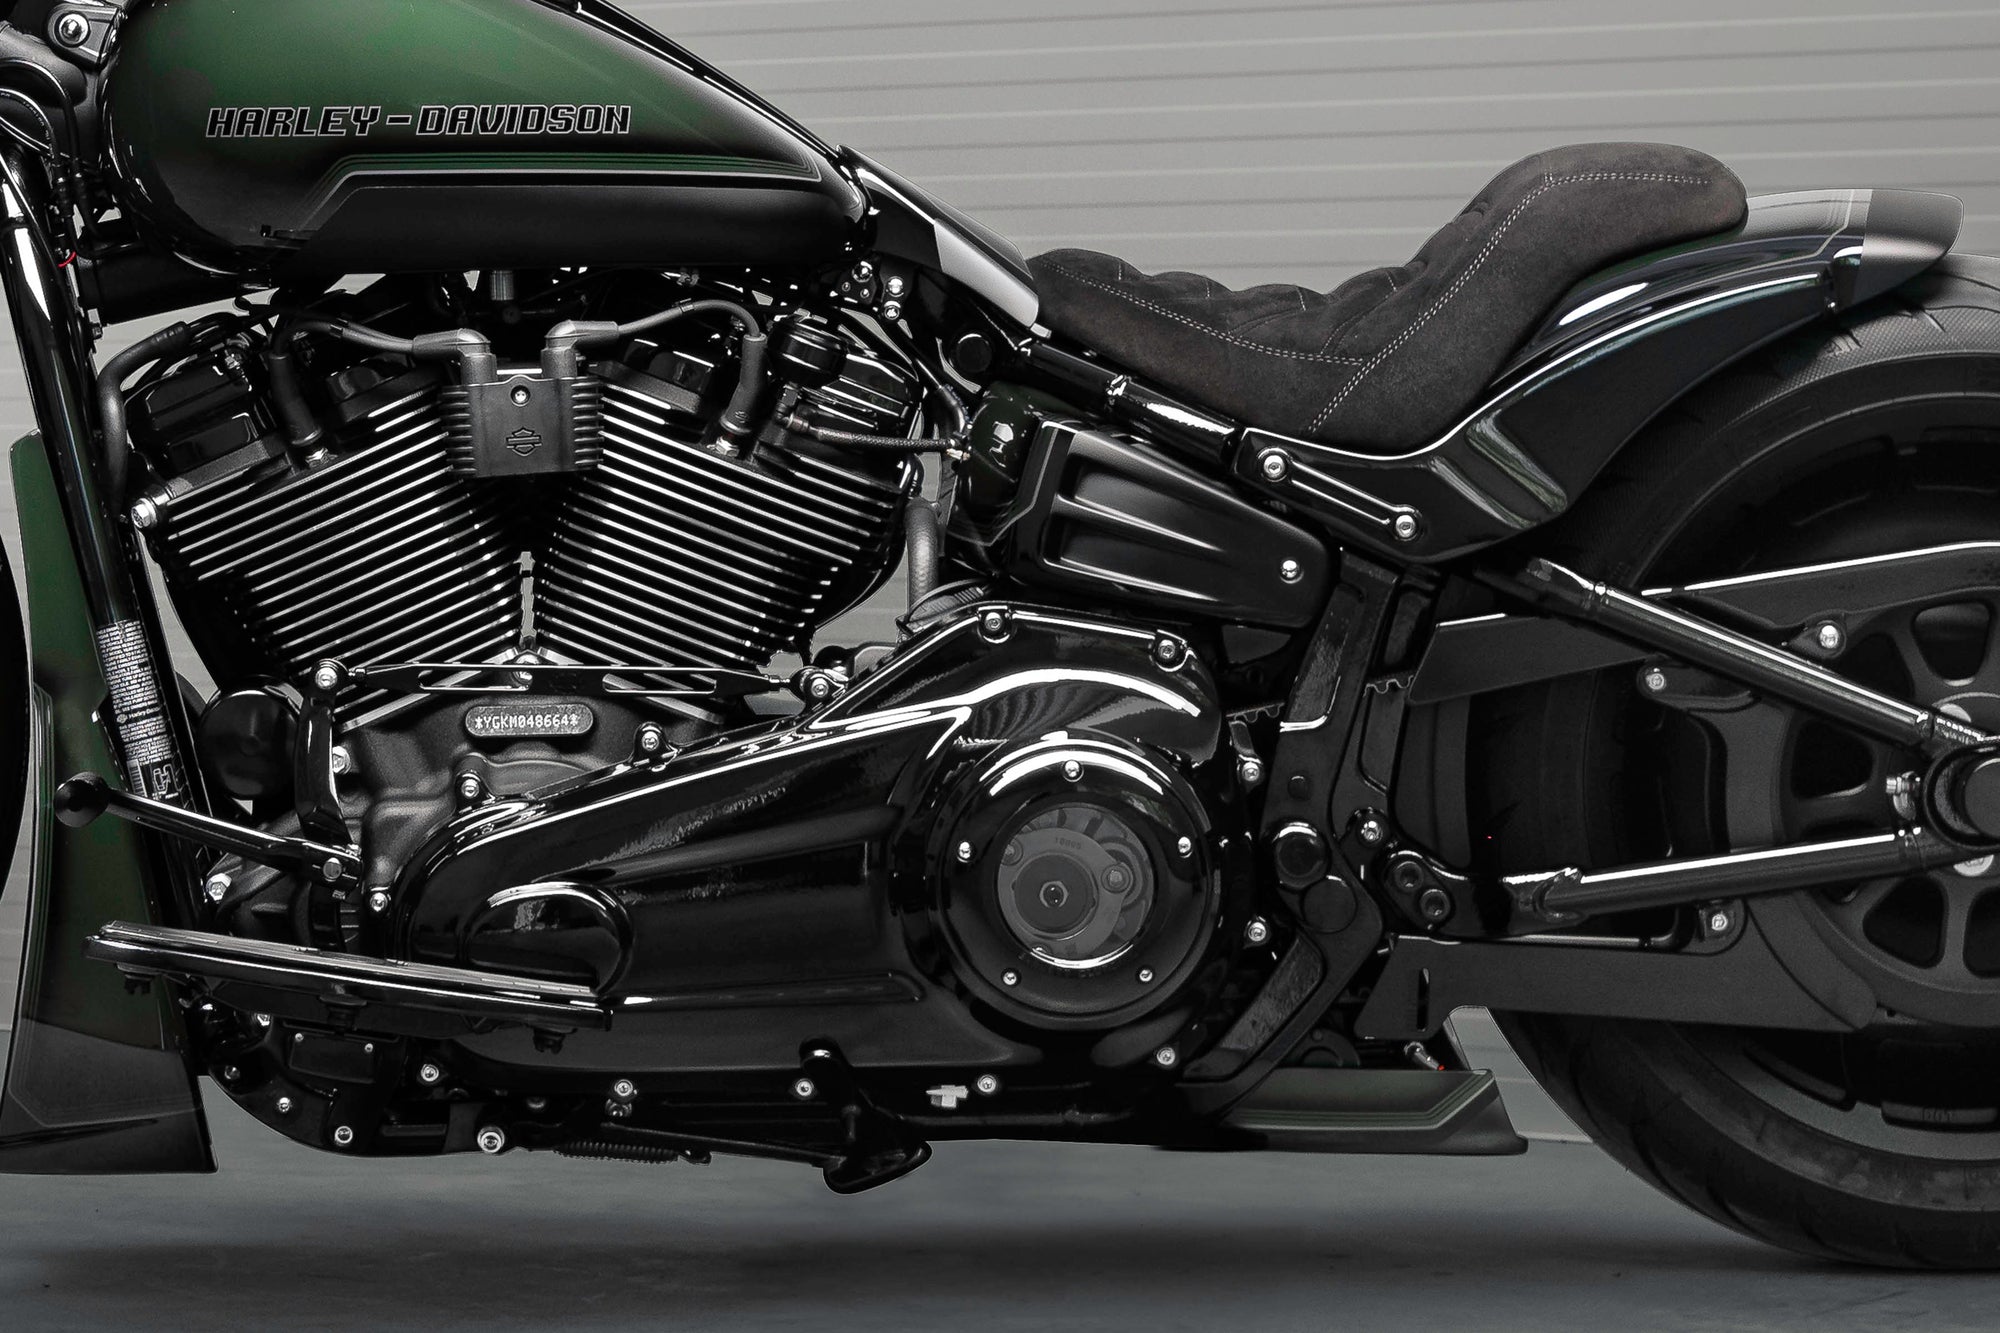 Zoomed Harley Davidson Fat Boy motorcycle with Killer Custom parts from the side neutral background